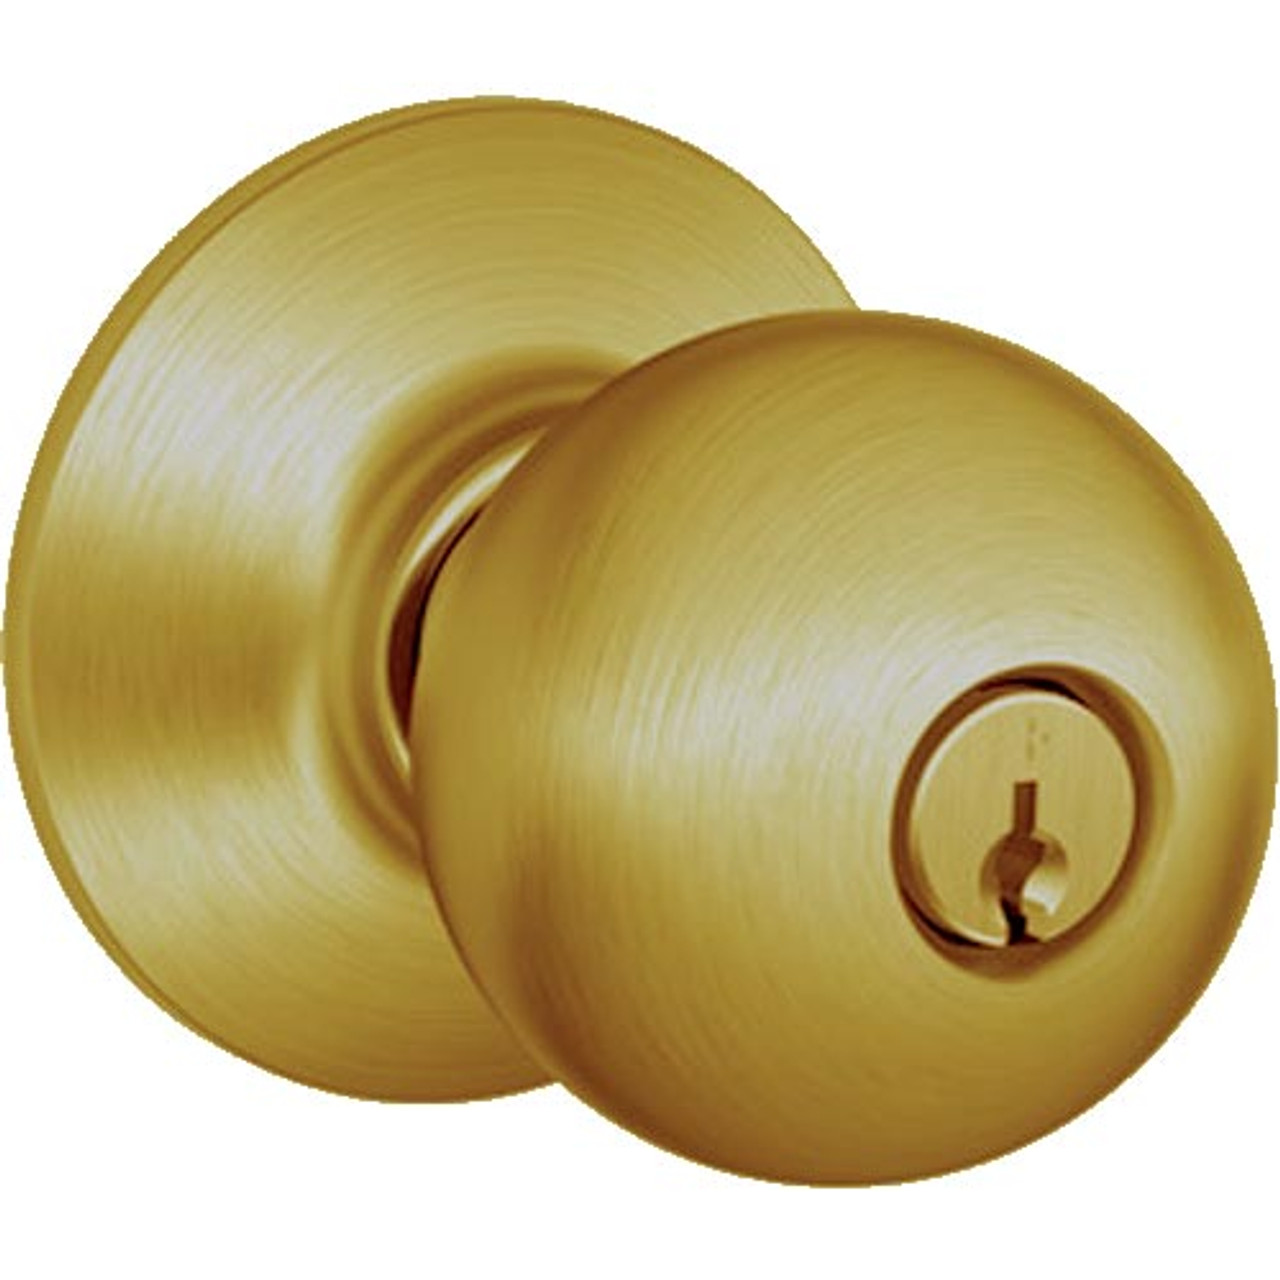 A85PD-ORB-609 Schlage Orbit Commercial Cylindrical Lock in Antique Brass